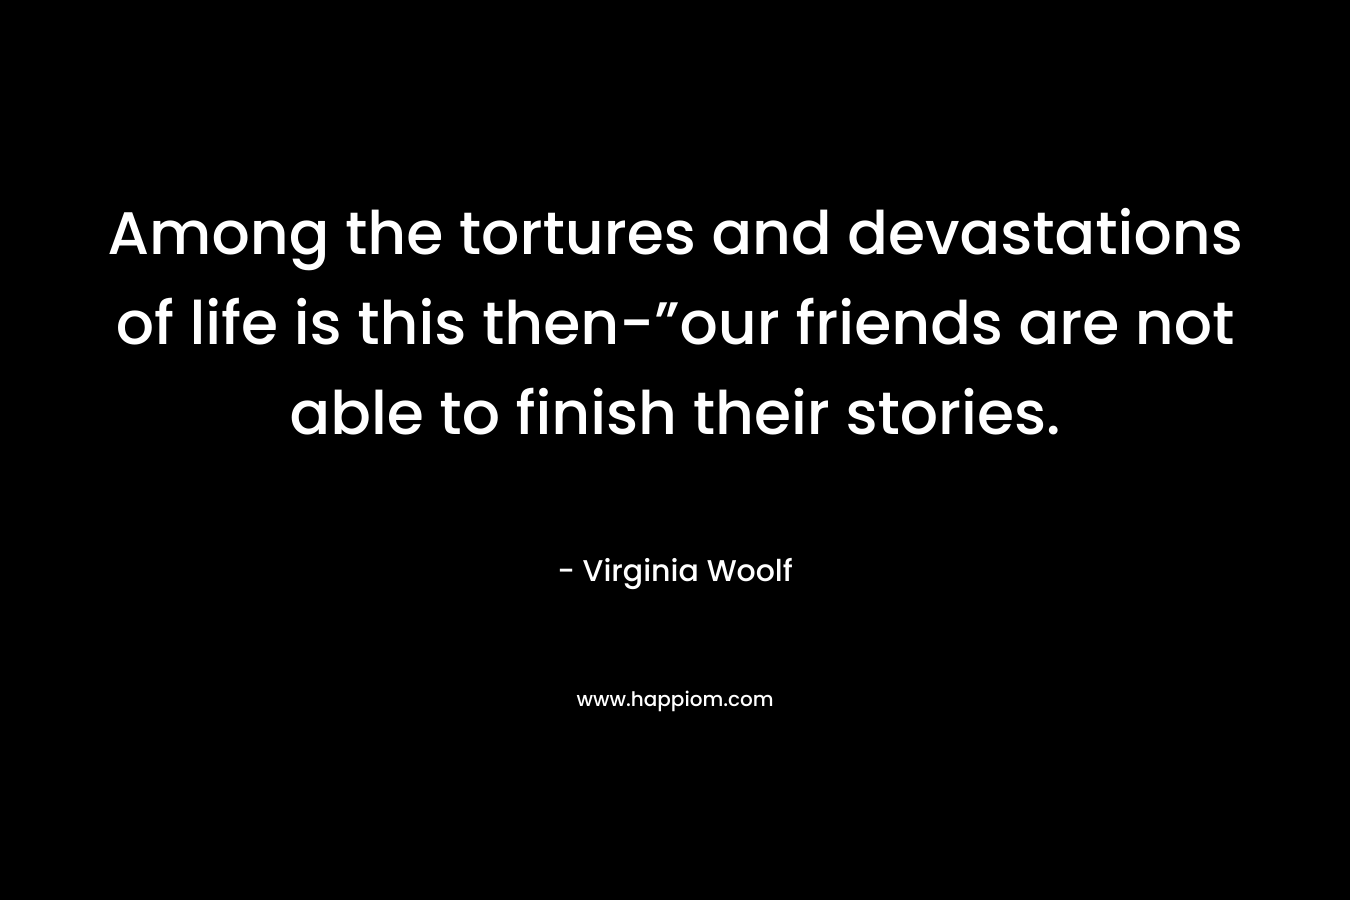 Among the tortures and devastations of life is this then-”our friends are not able to finish their stories.